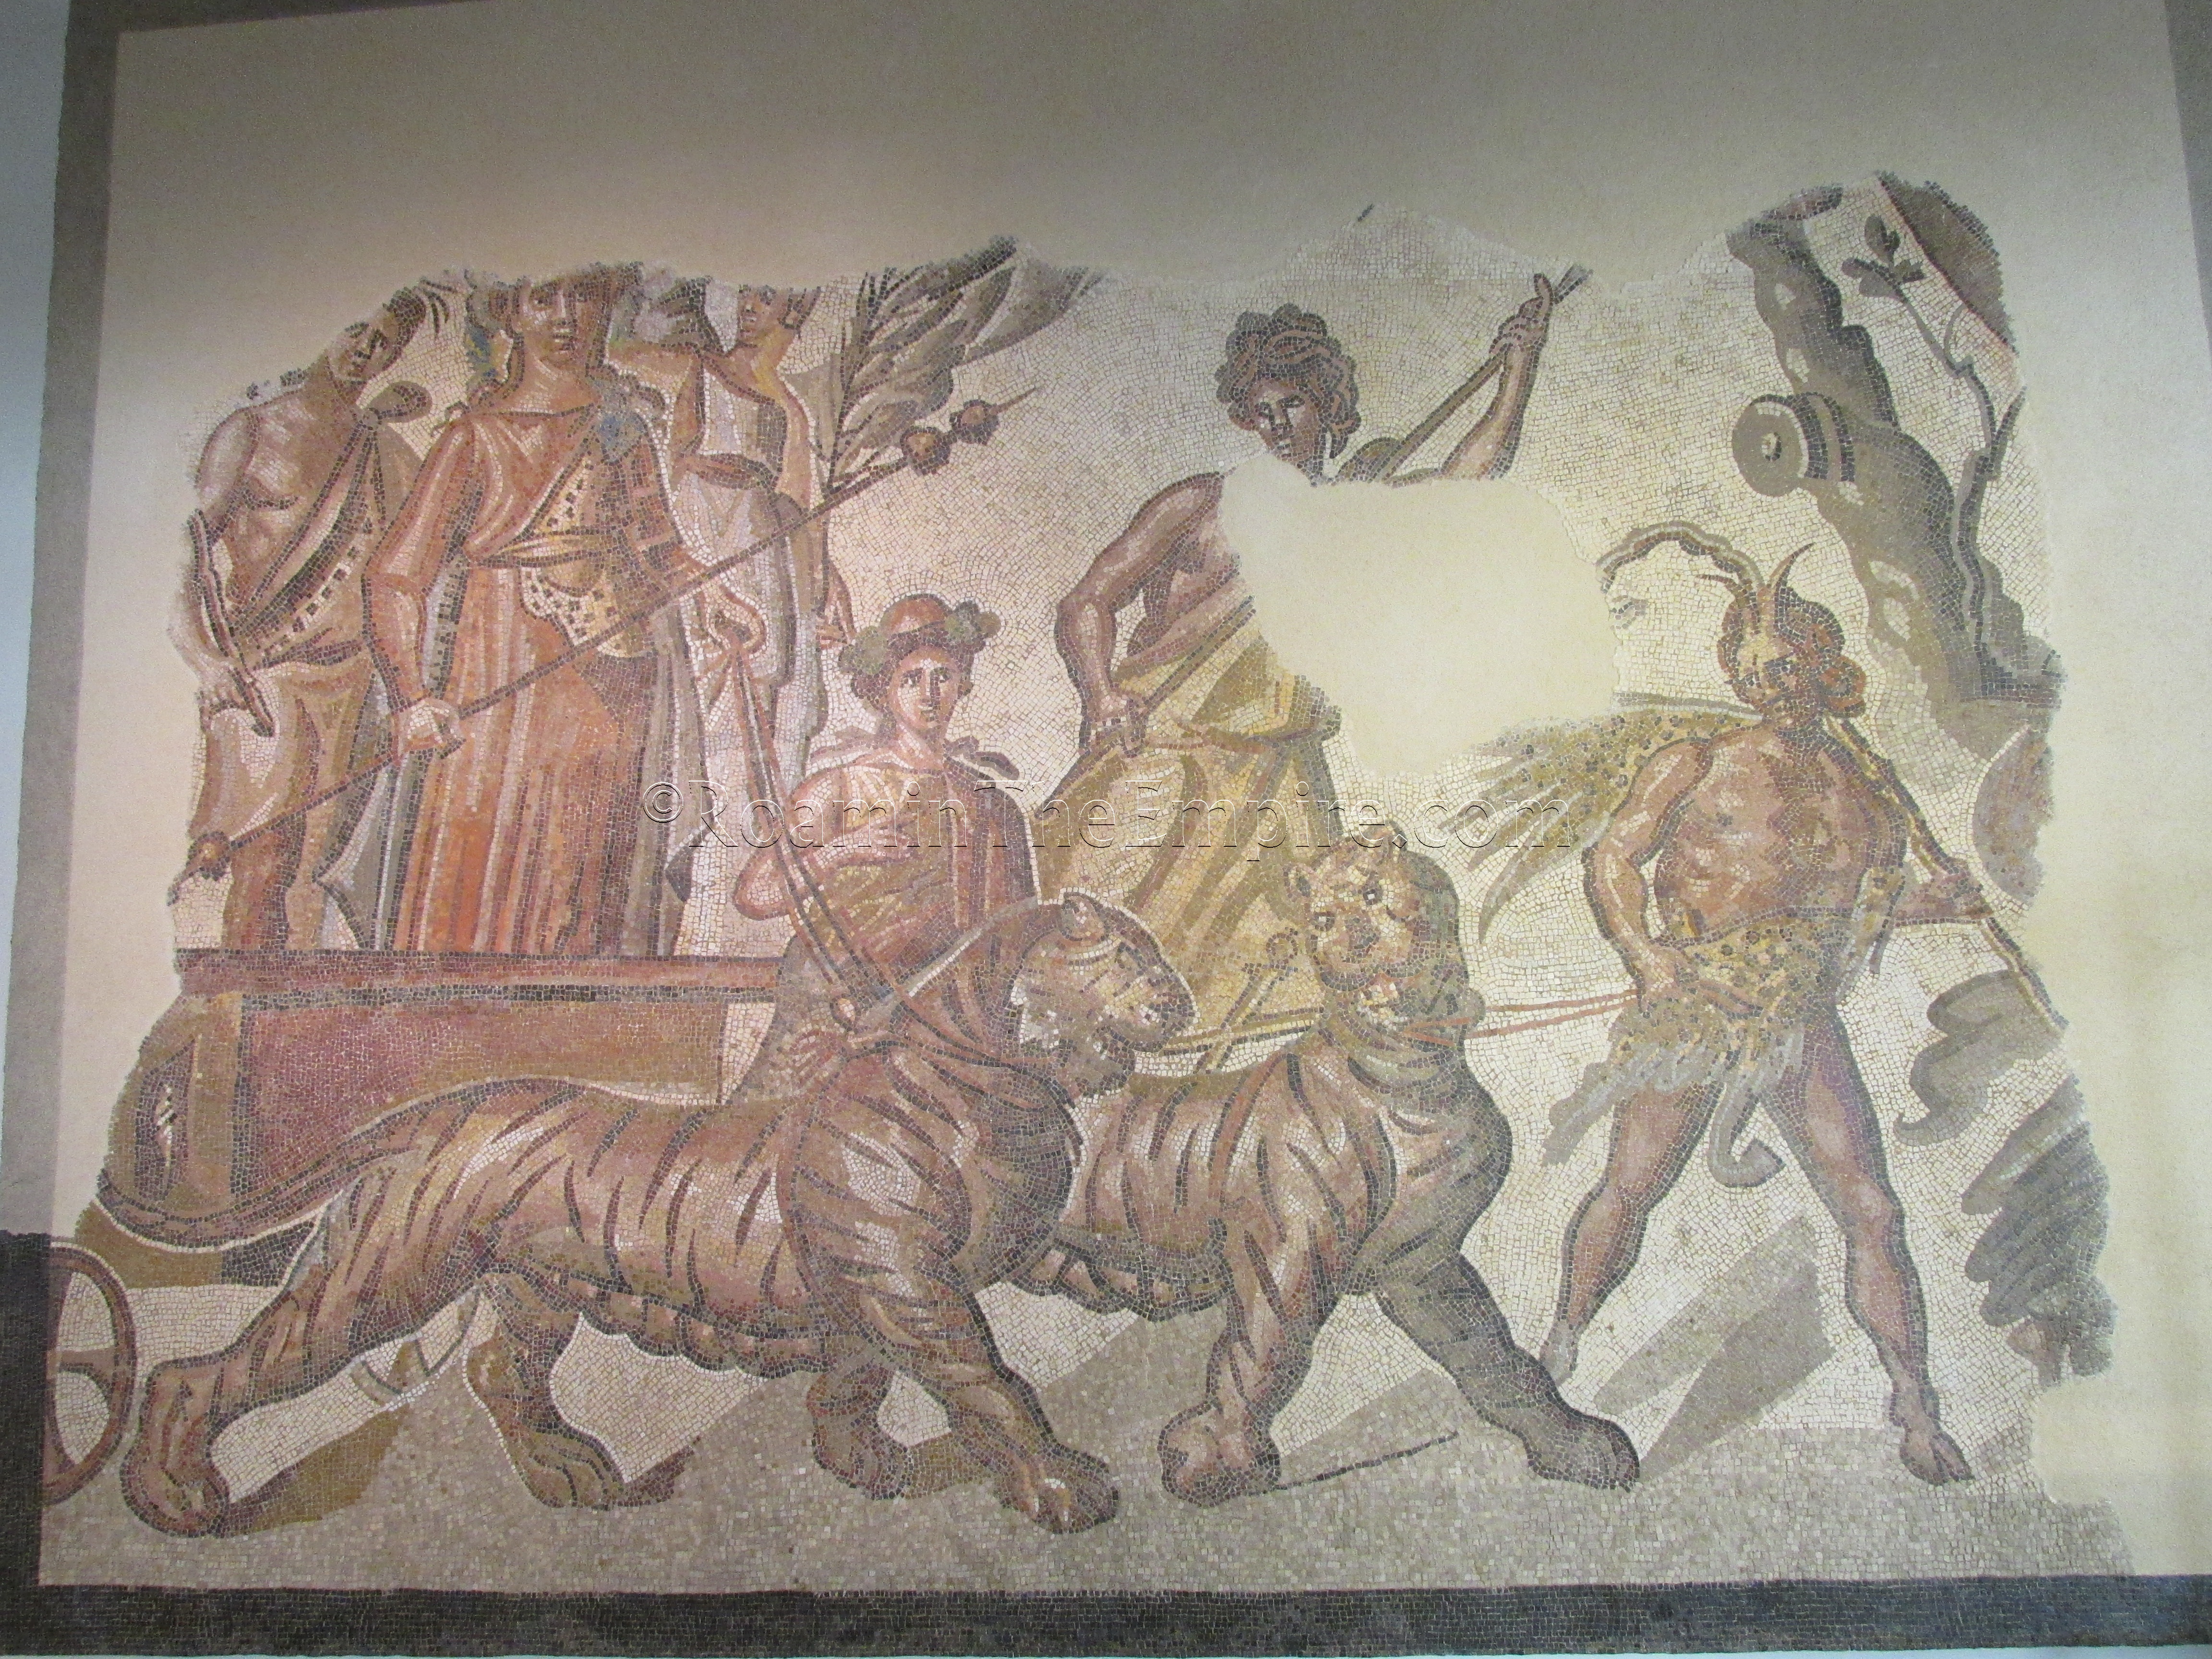 Mosaic depicting the triumphal entry of Bacchus. Dated to the 2nd century CE. Found at Caesaraugusta (modern-day Zaragoza). Madrid.